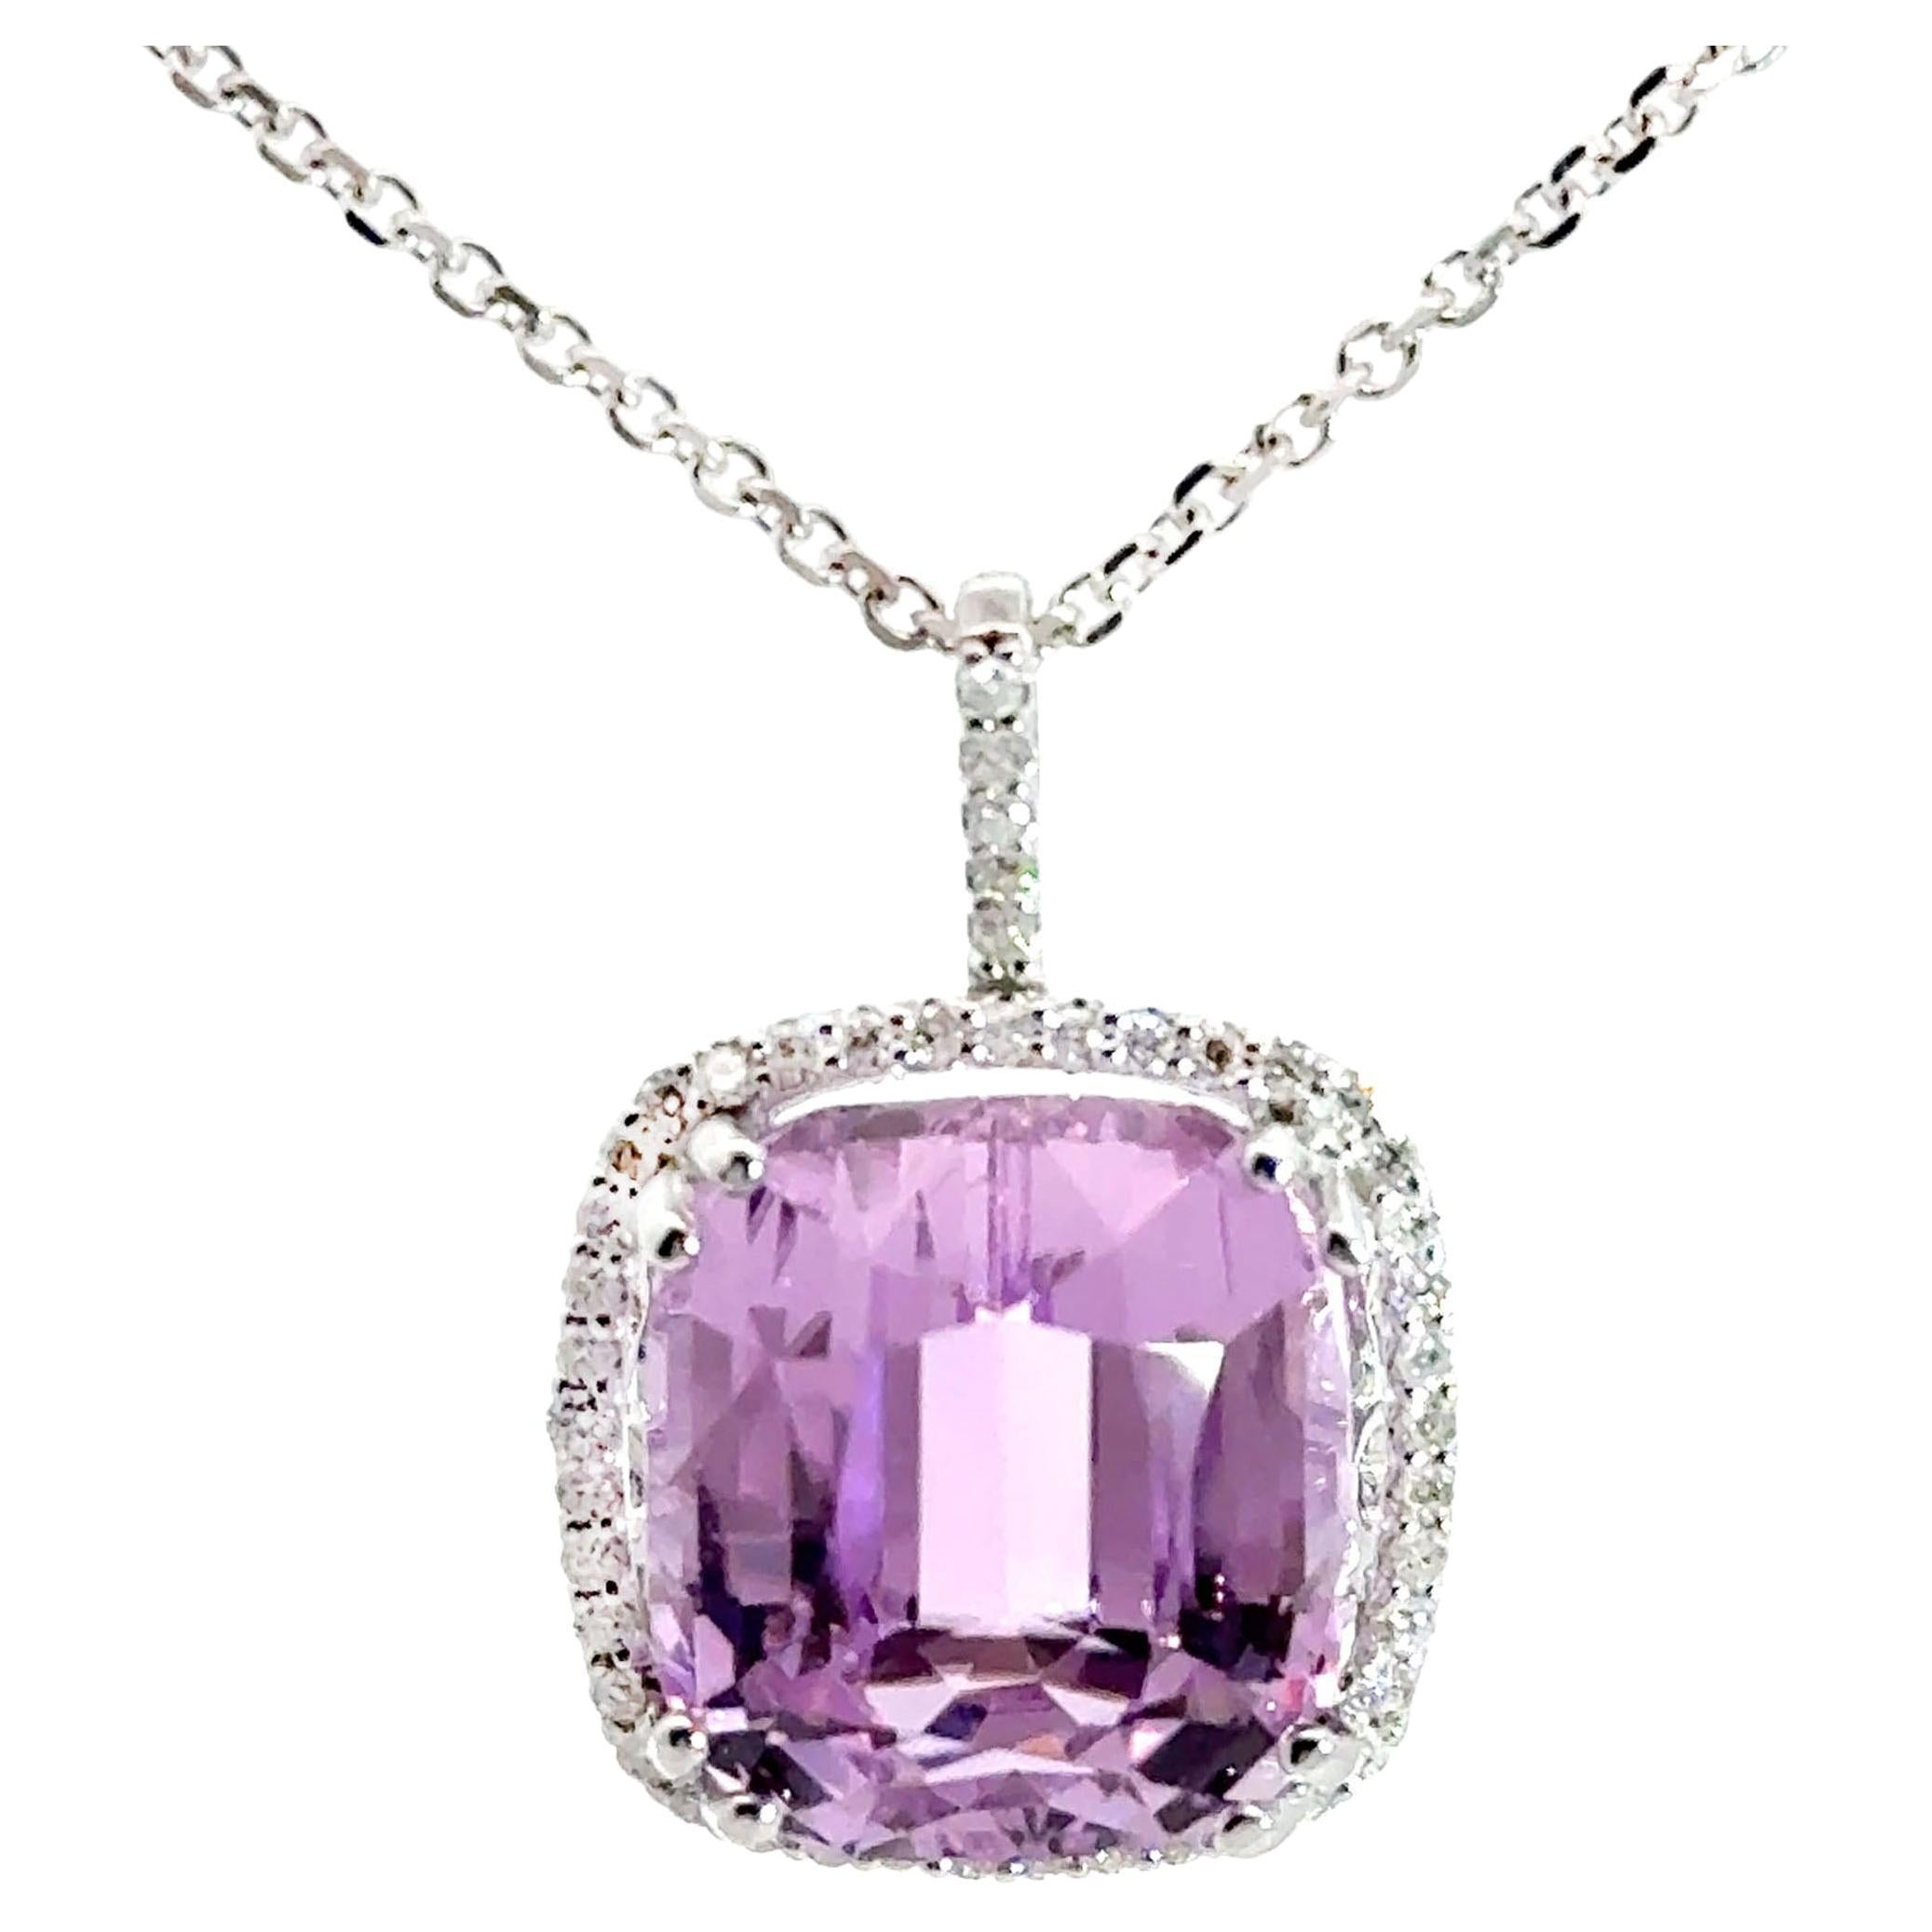 14K White Gold Halo Necklace with Kunzite and Diamonds